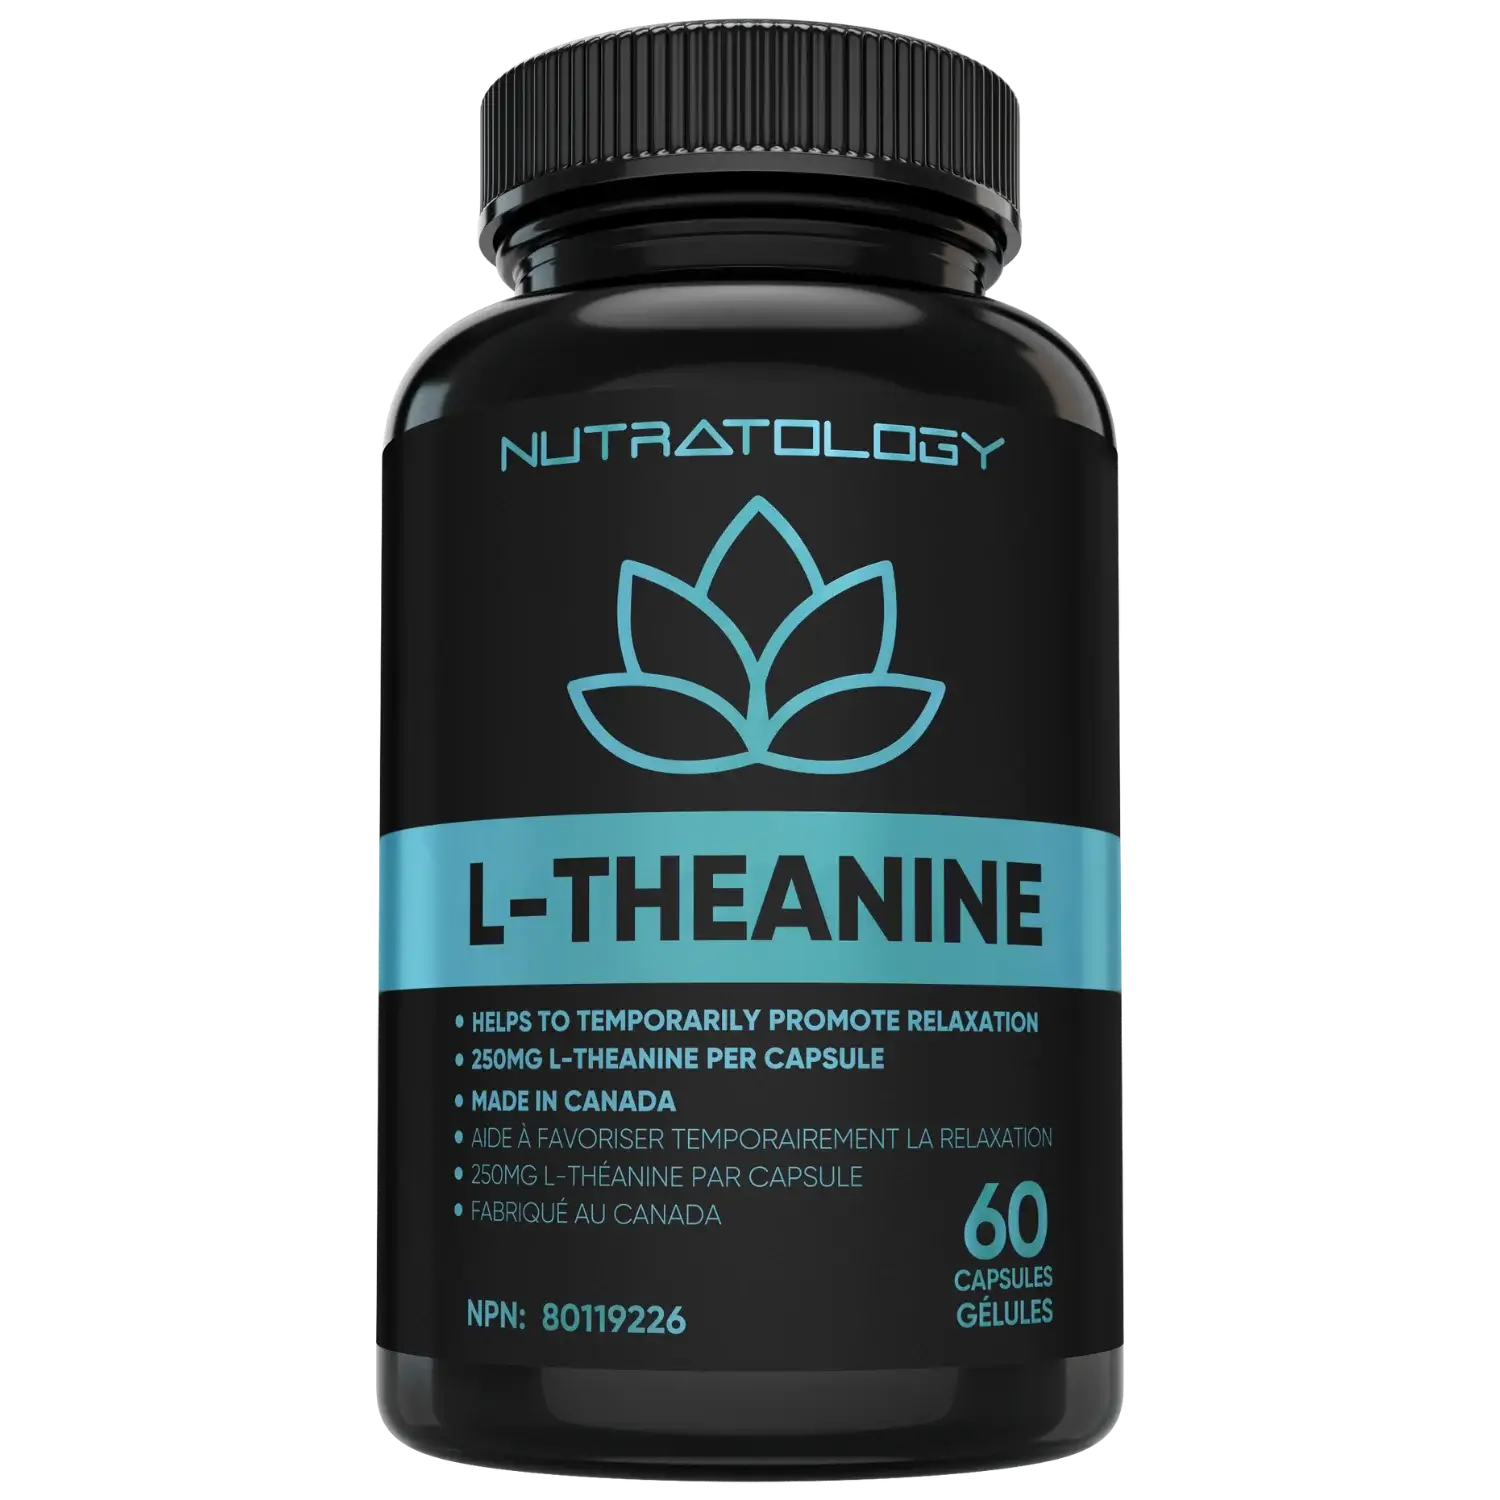 Nutratology L-Theanine for Stress Relief - 60 Capsules